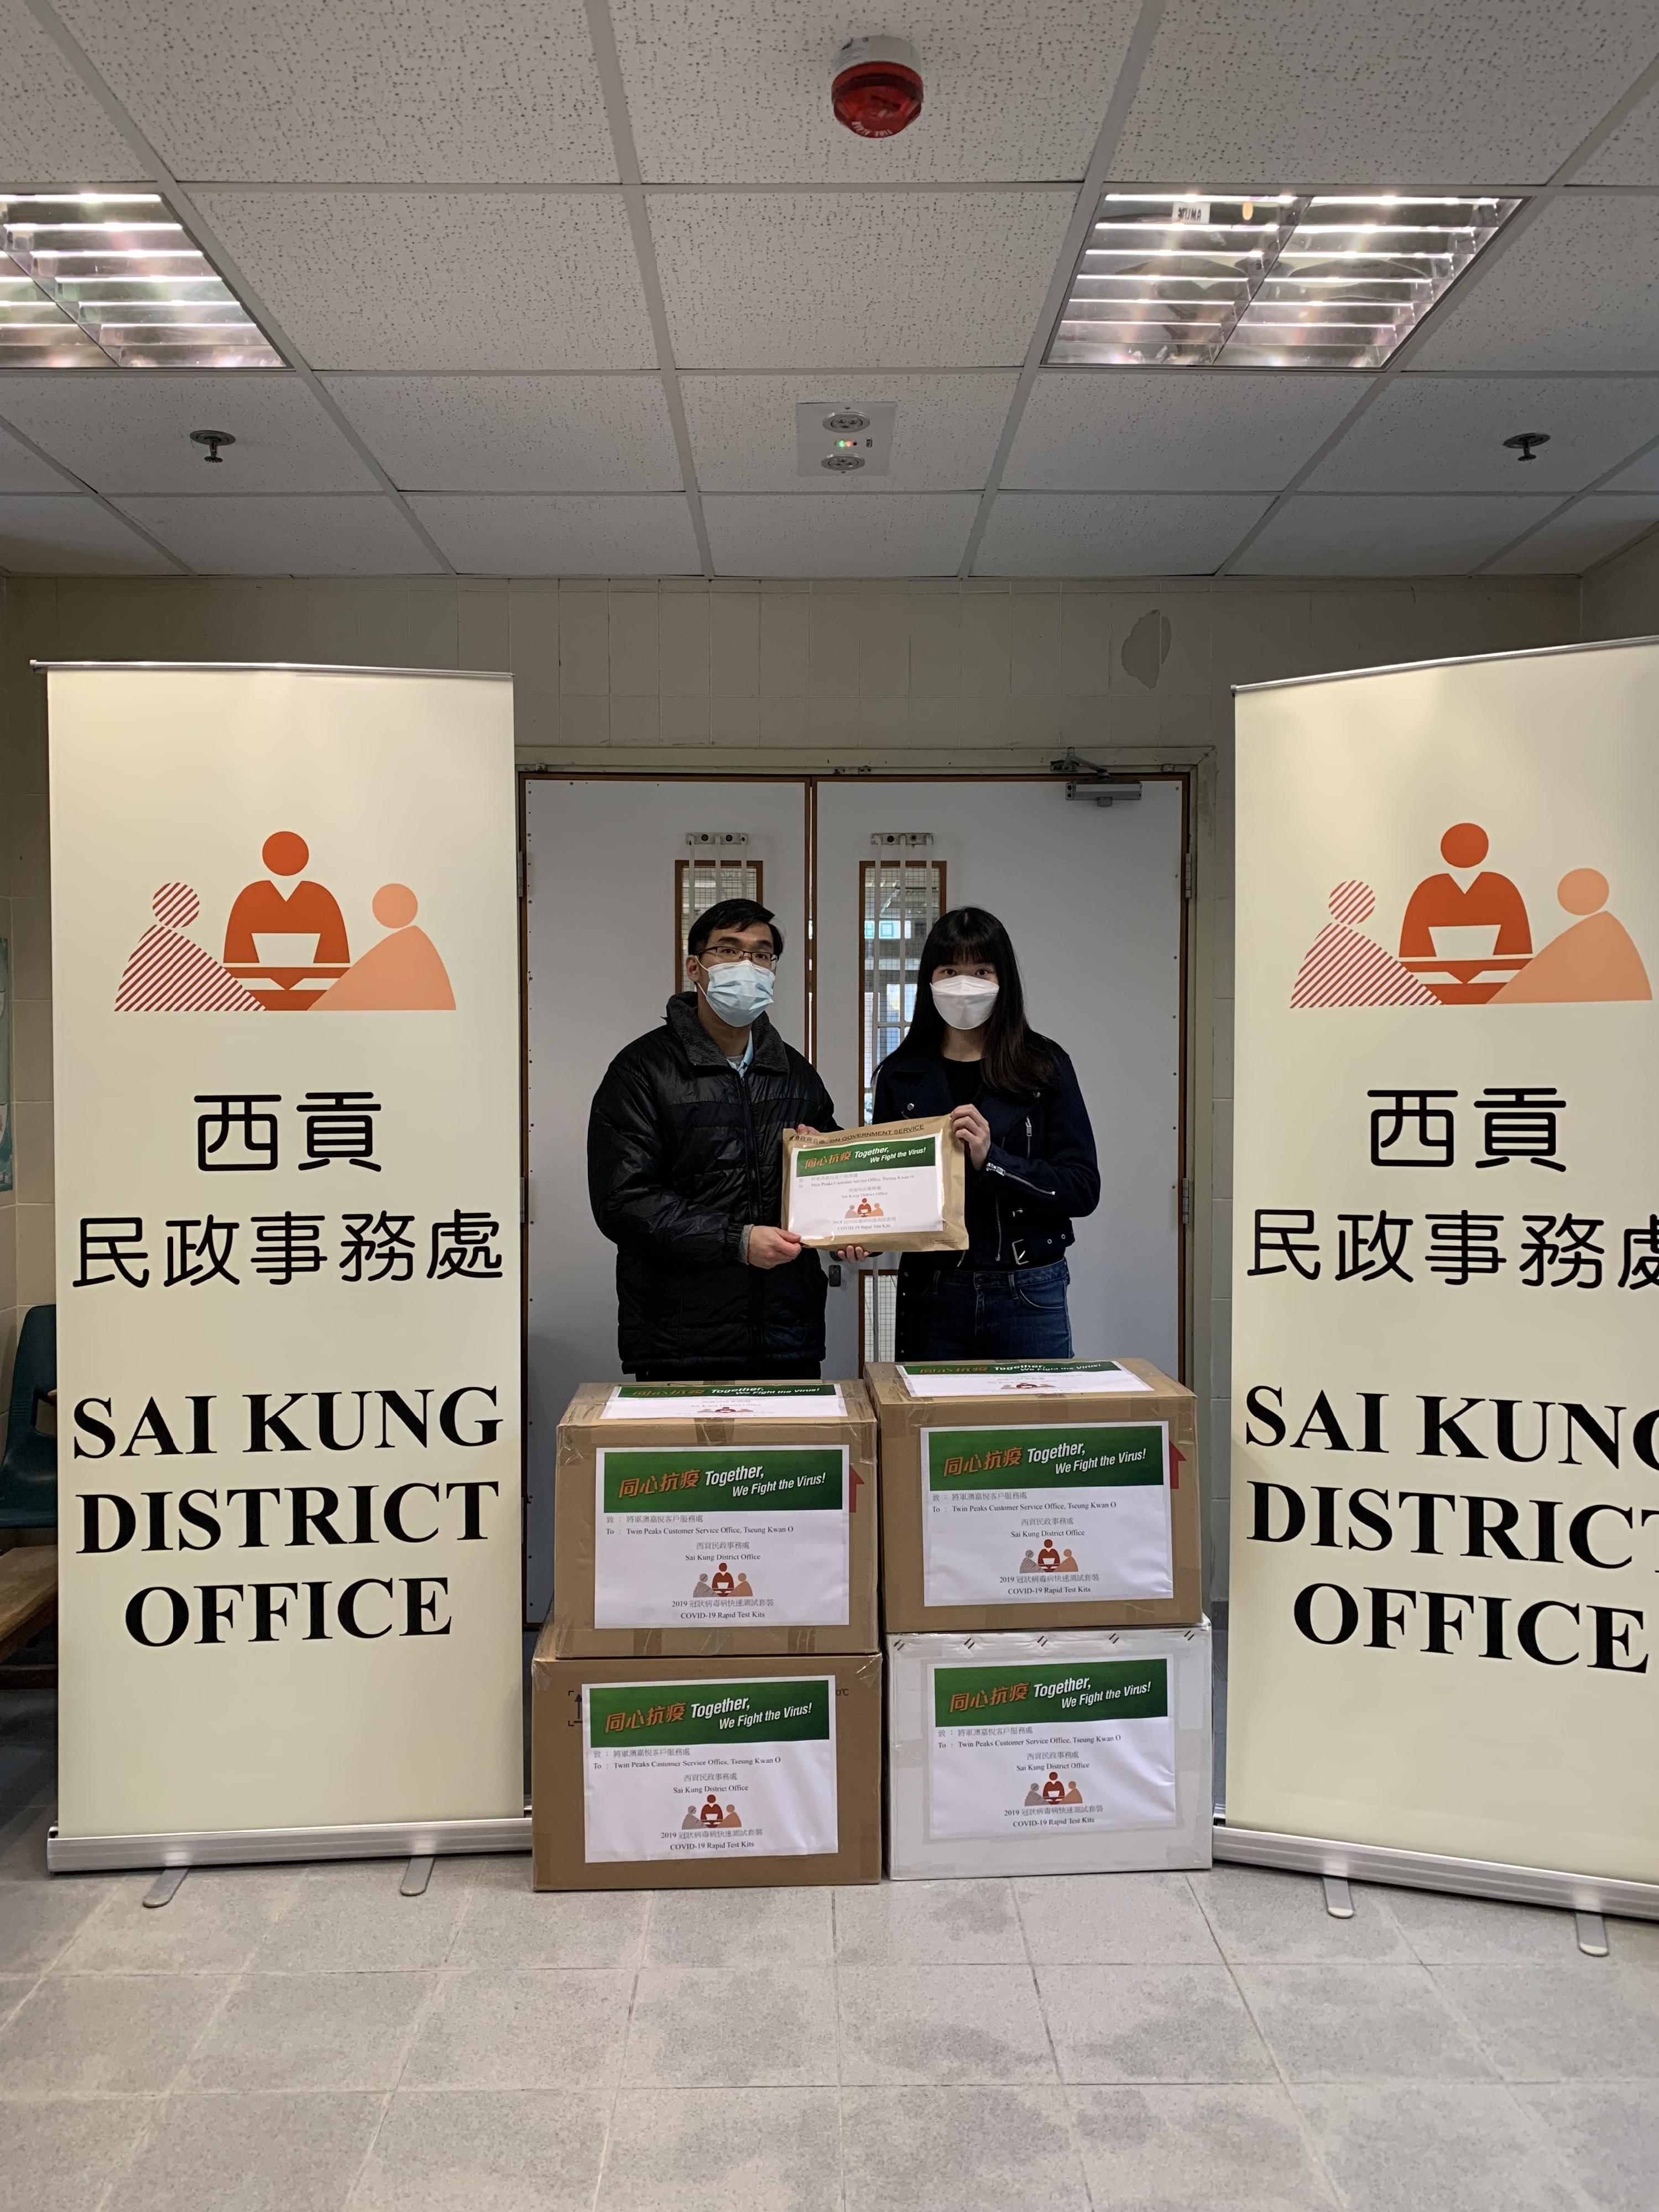 The Sai Kung District Office today (February 21) distributed rapid test kits to households, cleansing workers and property management staff living and working in Twin Peaks for voluntary testing through the property management company.